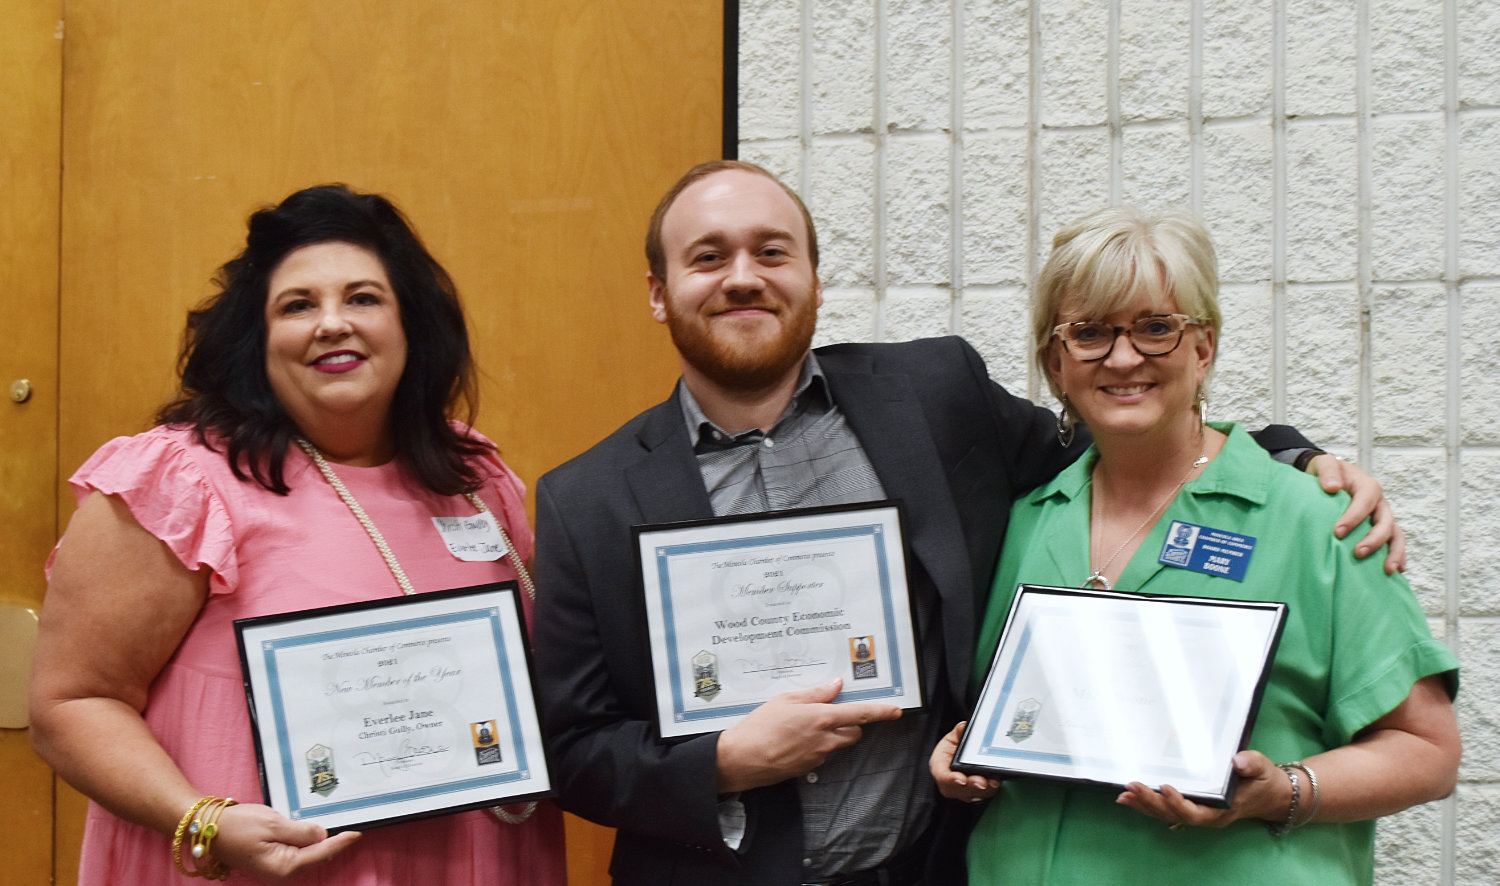 Mineola Chamber of Commerce award winners recognized Friday included, from left, Christi Gully, Christophe Trahan and Mary Boone.